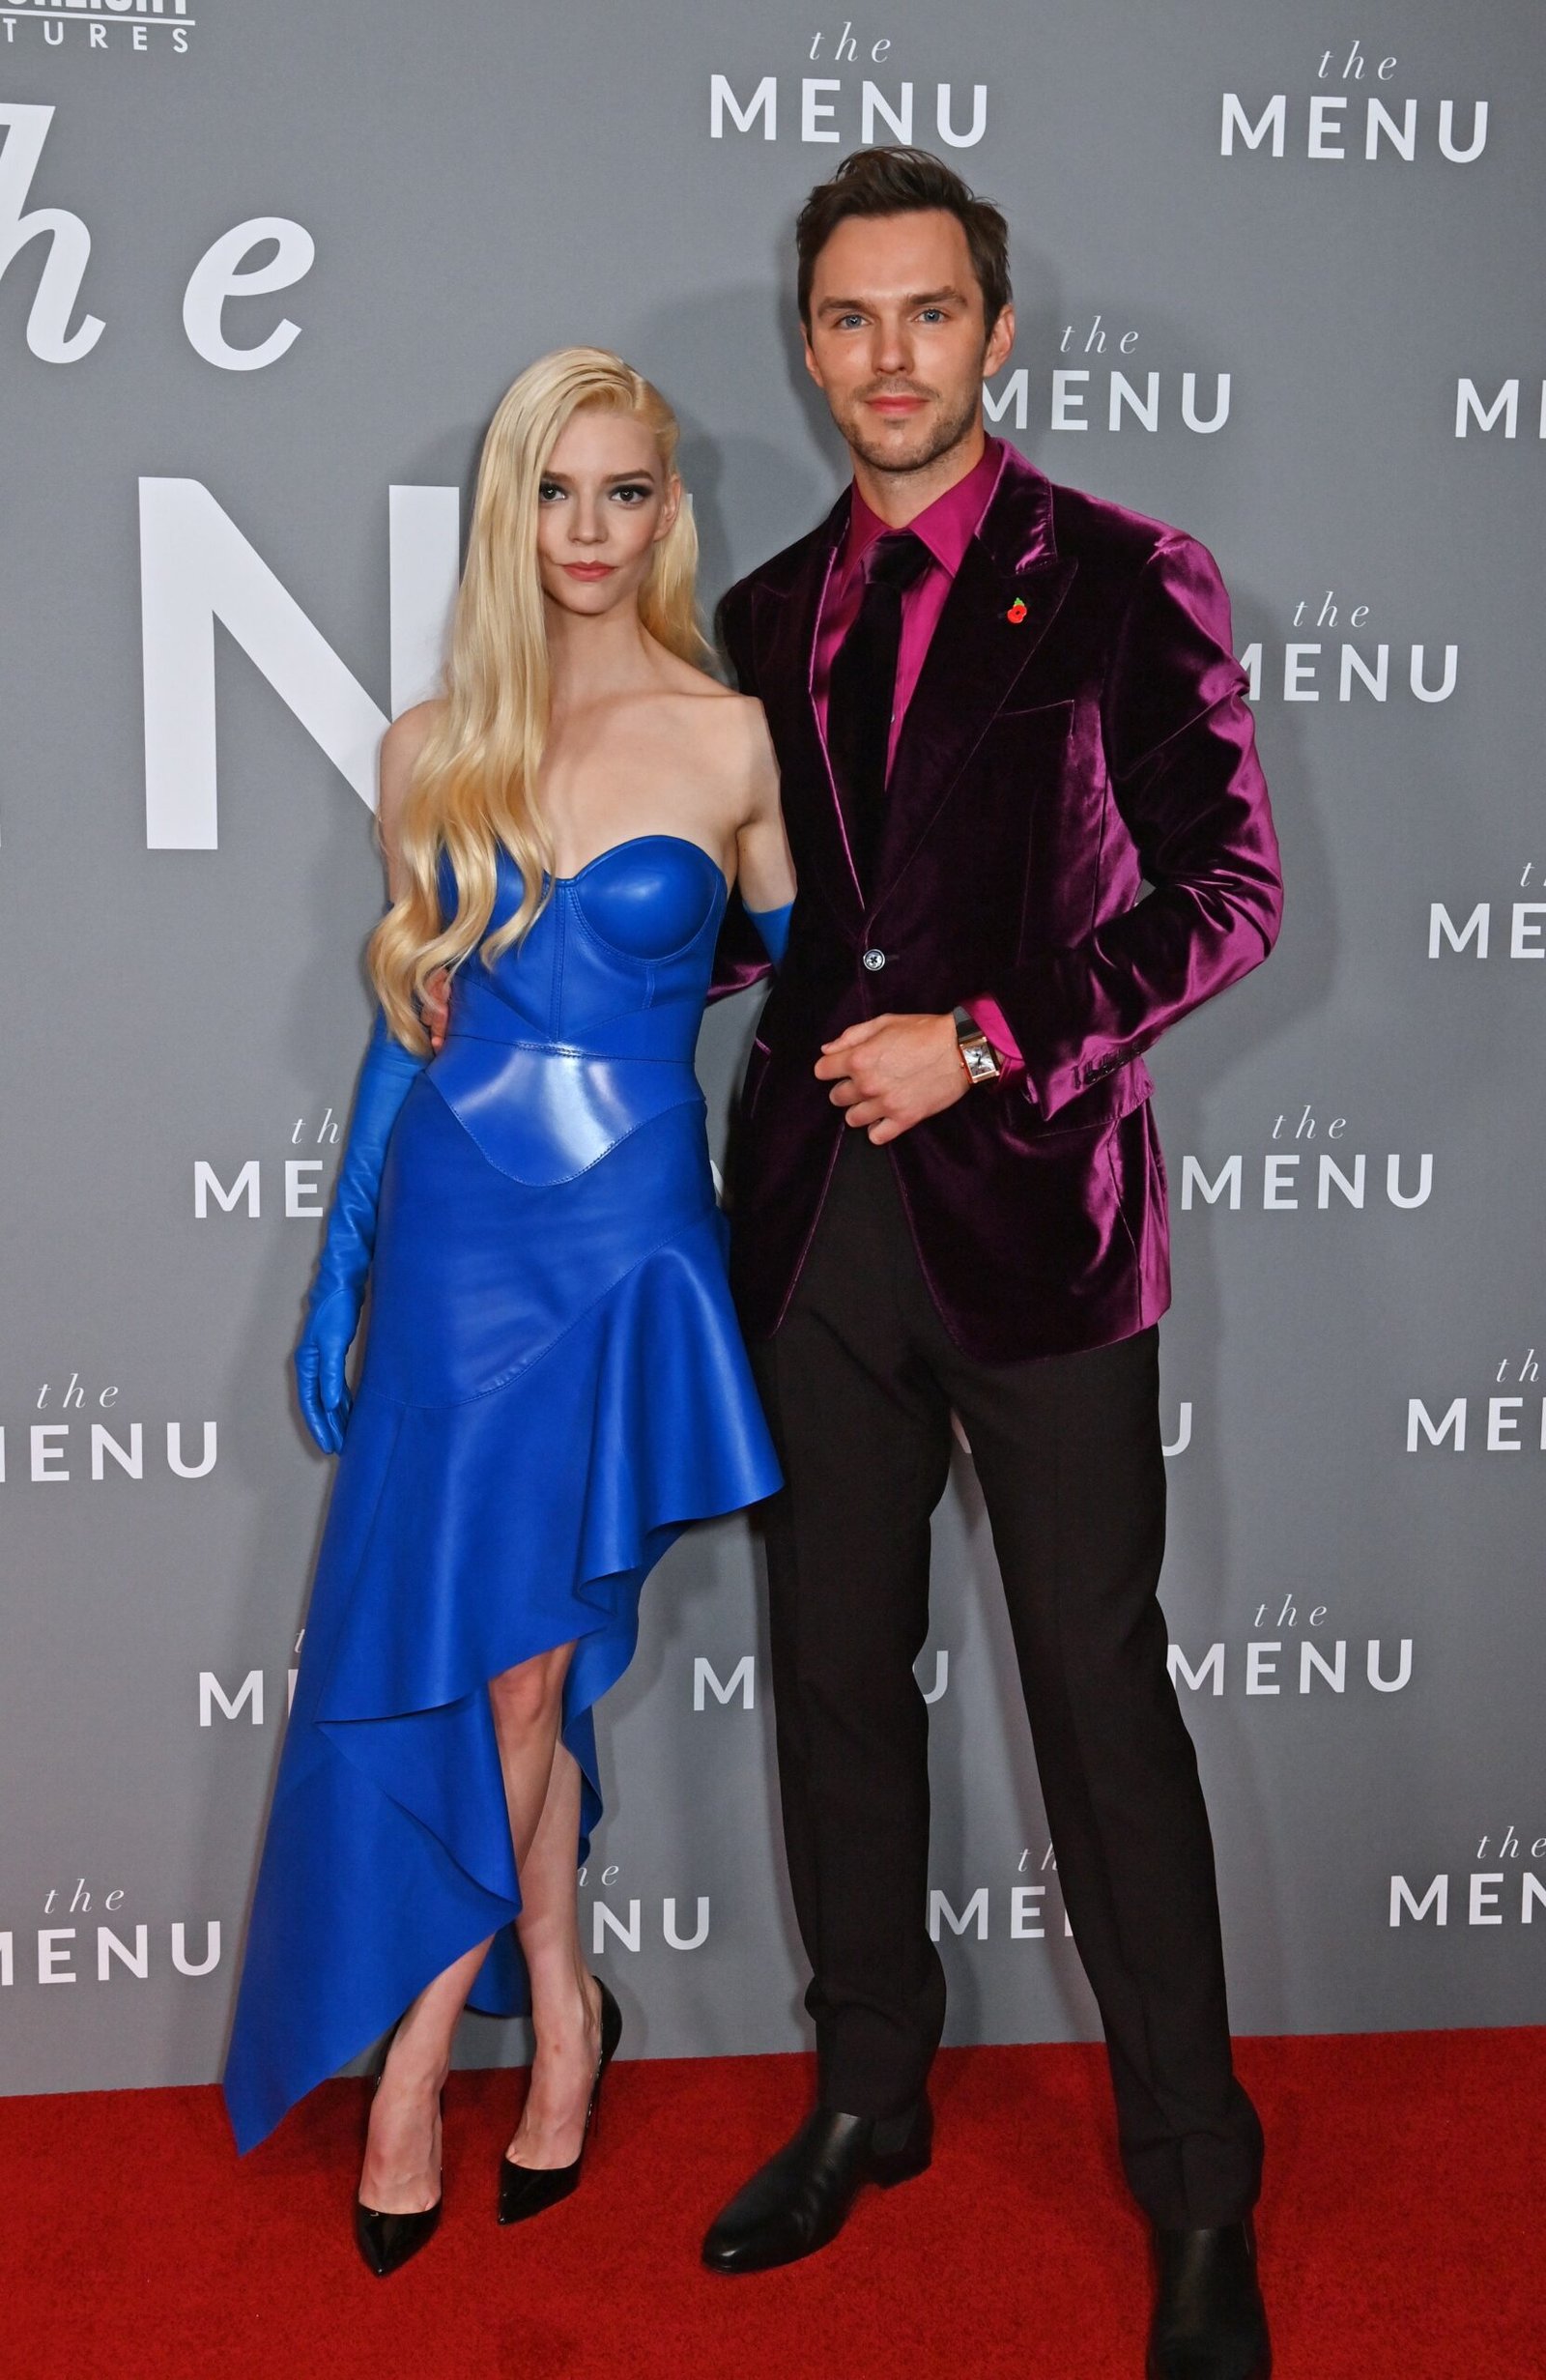 JAEGER-LECOULTRE AMBASSADORS ANYA TAYLOR-JOY AND NICHOLAS HOULT ATTEND THE WORLD PREMIERE OF THE MENU IN LONDON